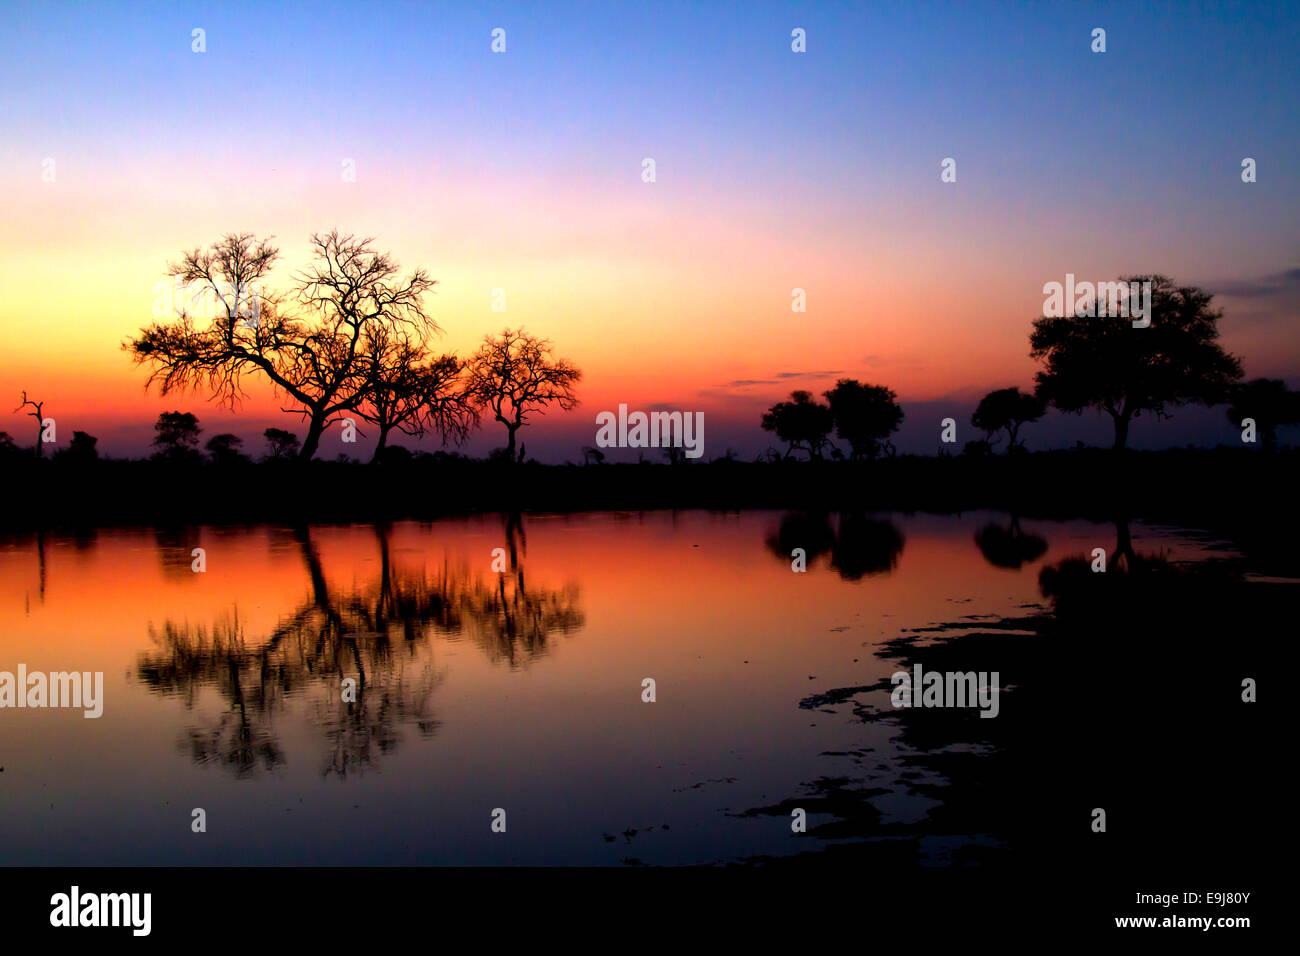 Trees reflected in still water at sunset Stock Photo